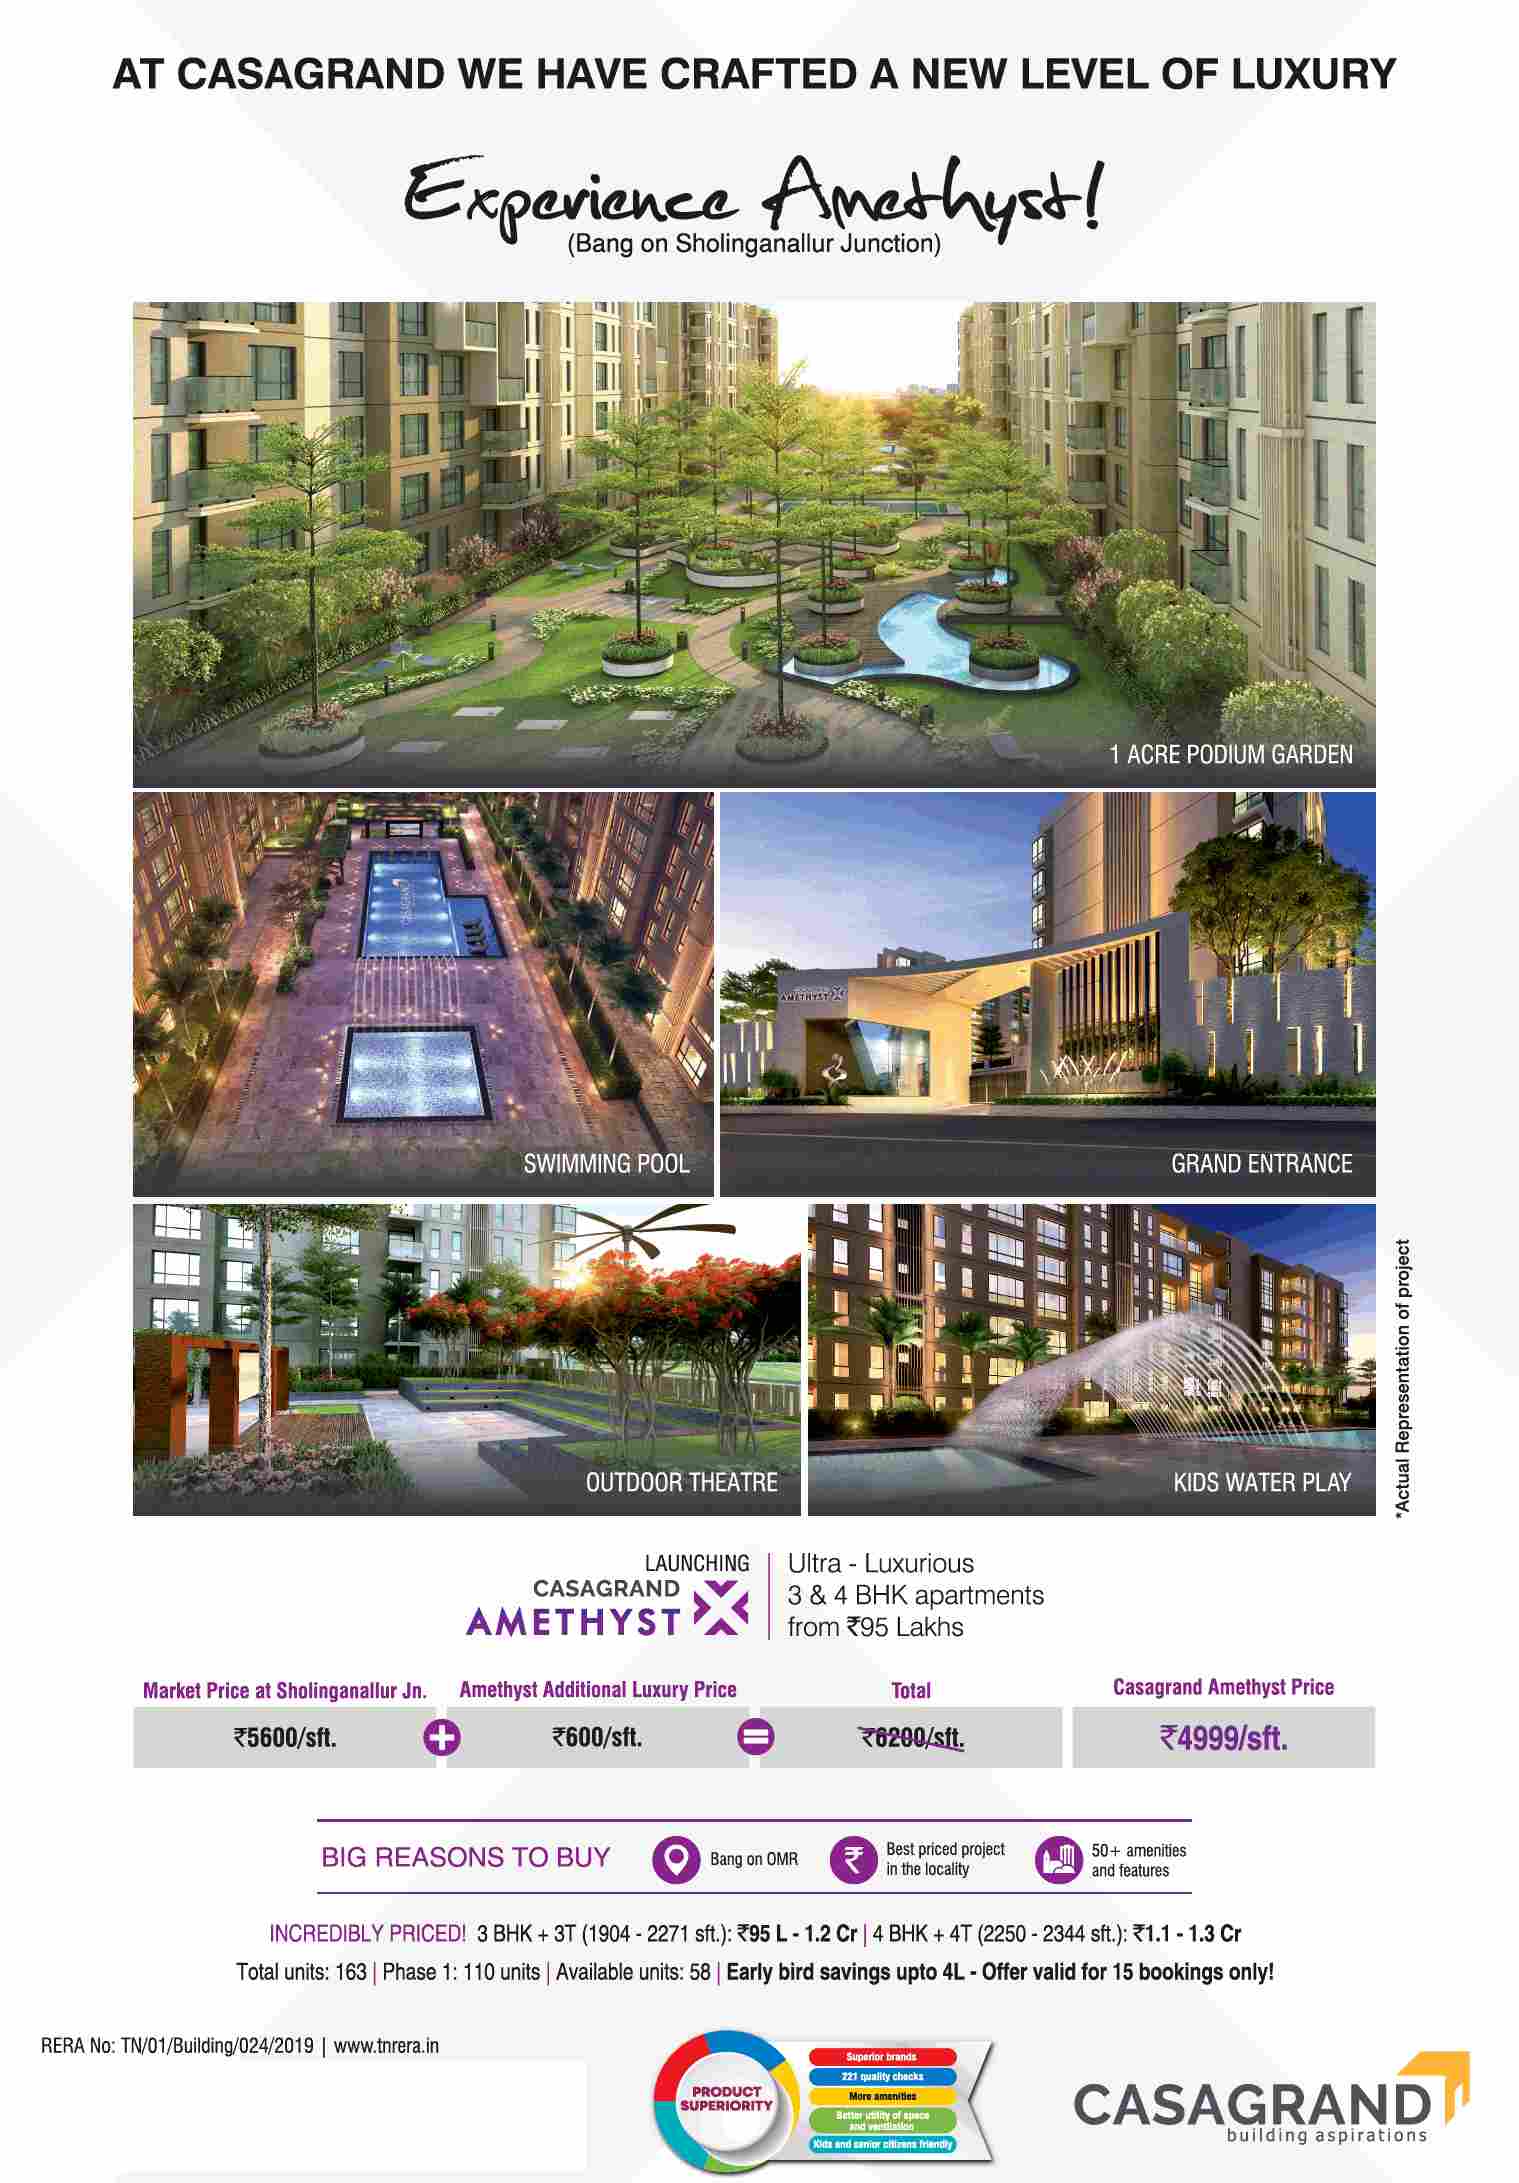 Book ultra-luxurious 3 & 4 BHK apartments @ Rs 95 Lakhs at Casagrand Amethyst in Chennai Update